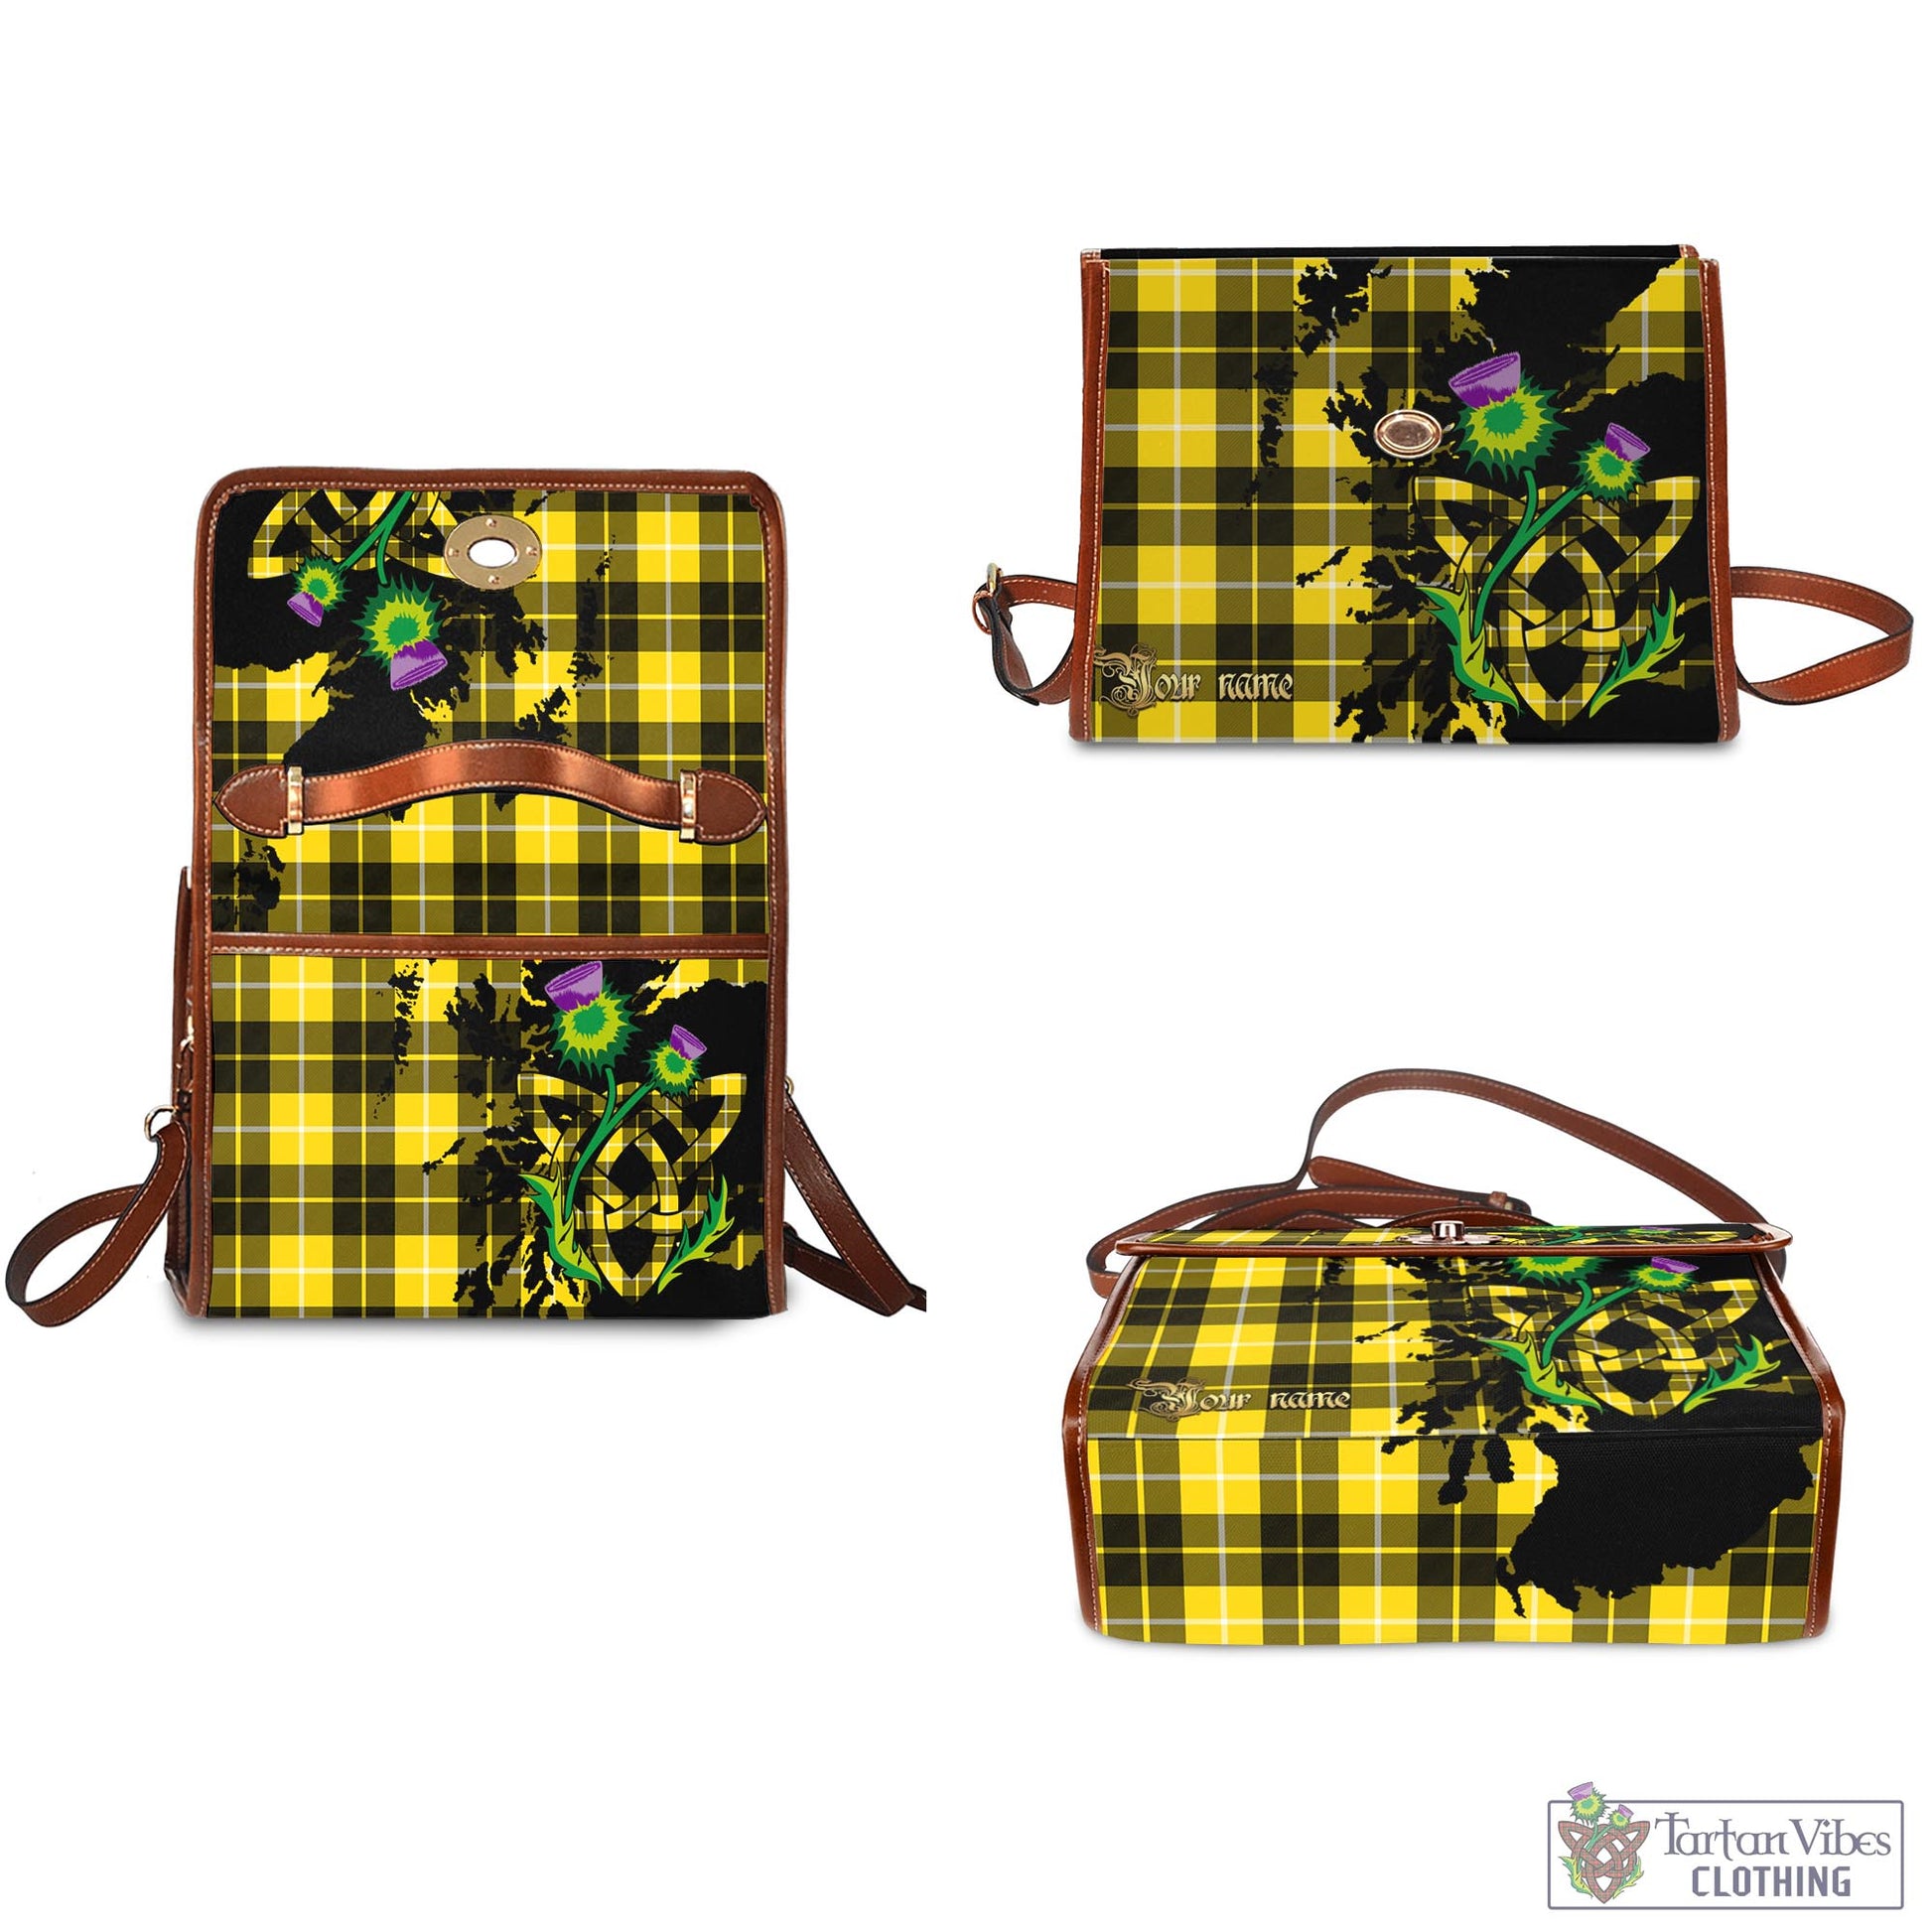 Tartan Vibes Clothing Barclay Dress Modern Tartan Waterproof Canvas Bag with Scotland Map and Thistle Celtic Accents